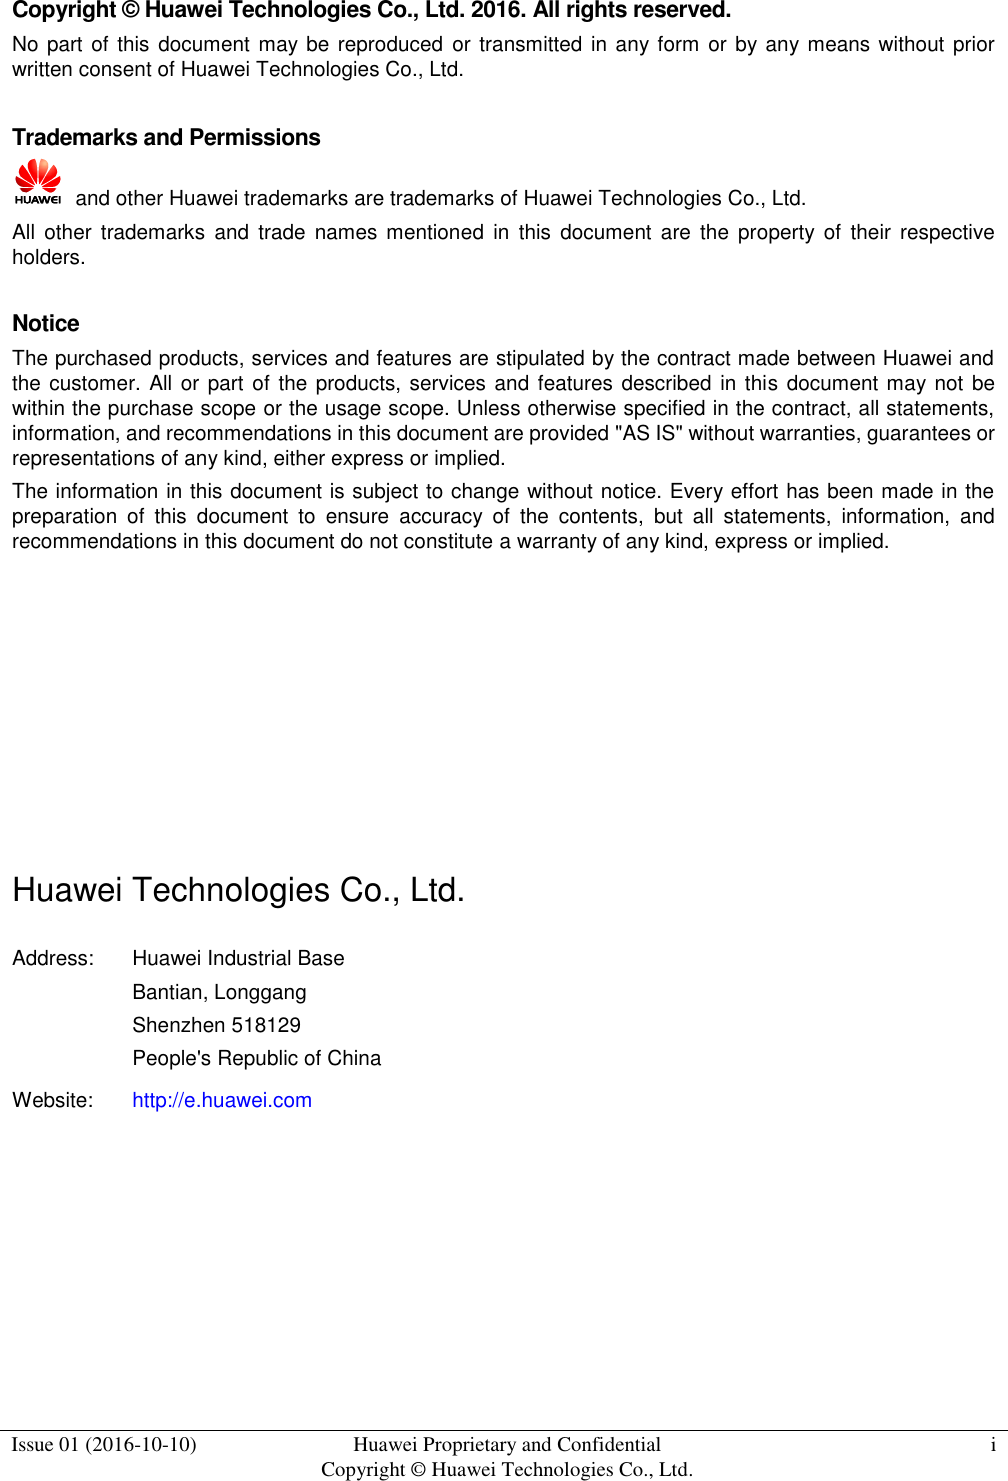  Issue 01 (2016-10-10) Huawei Proprietary and Confidential Copyright © Huawei Technologies Co., Ltd. i  Copyright © Huawei Technologies Co., Ltd. 2016. All rights reserved. No part of this  document  may be reproduced  or transmitted in any form or by any means without prior written consent of Huawei Technologies Co., Ltd.  Trademarks and Permissions   and other Huawei trademarks are trademarks of Huawei Technologies Co., Ltd. All  other  trademarks  and  trade  names mentioned  in  this  document  are  the  property of  their  respective holders.  Notice The purchased products, services and features are stipulated by the contract made between Huawei and the customer.  All or part of the products, services and features described  in this document may not be within the purchase scope or the usage scope. Unless otherwise specified in the contract, all statements, information, and recommendations in this document are provided &quot;AS IS&quot; without warranties, guarantees or representations of any kind, either express or implied. The information in this document is subject to change without notice. Every effort has been made in the preparation  of  this  document  to  ensure  accuracy  of  the  contents,  but  all  statements,  information,  and recommendations in this document do not constitute a warranty of any kind, express or implied.        Huawei Technologies Co., Ltd. Address: Huawei Industrial Base Bantian, Longgang Shenzhen 518129 People&apos;s Republic of China Website: http://e.huawei.com   